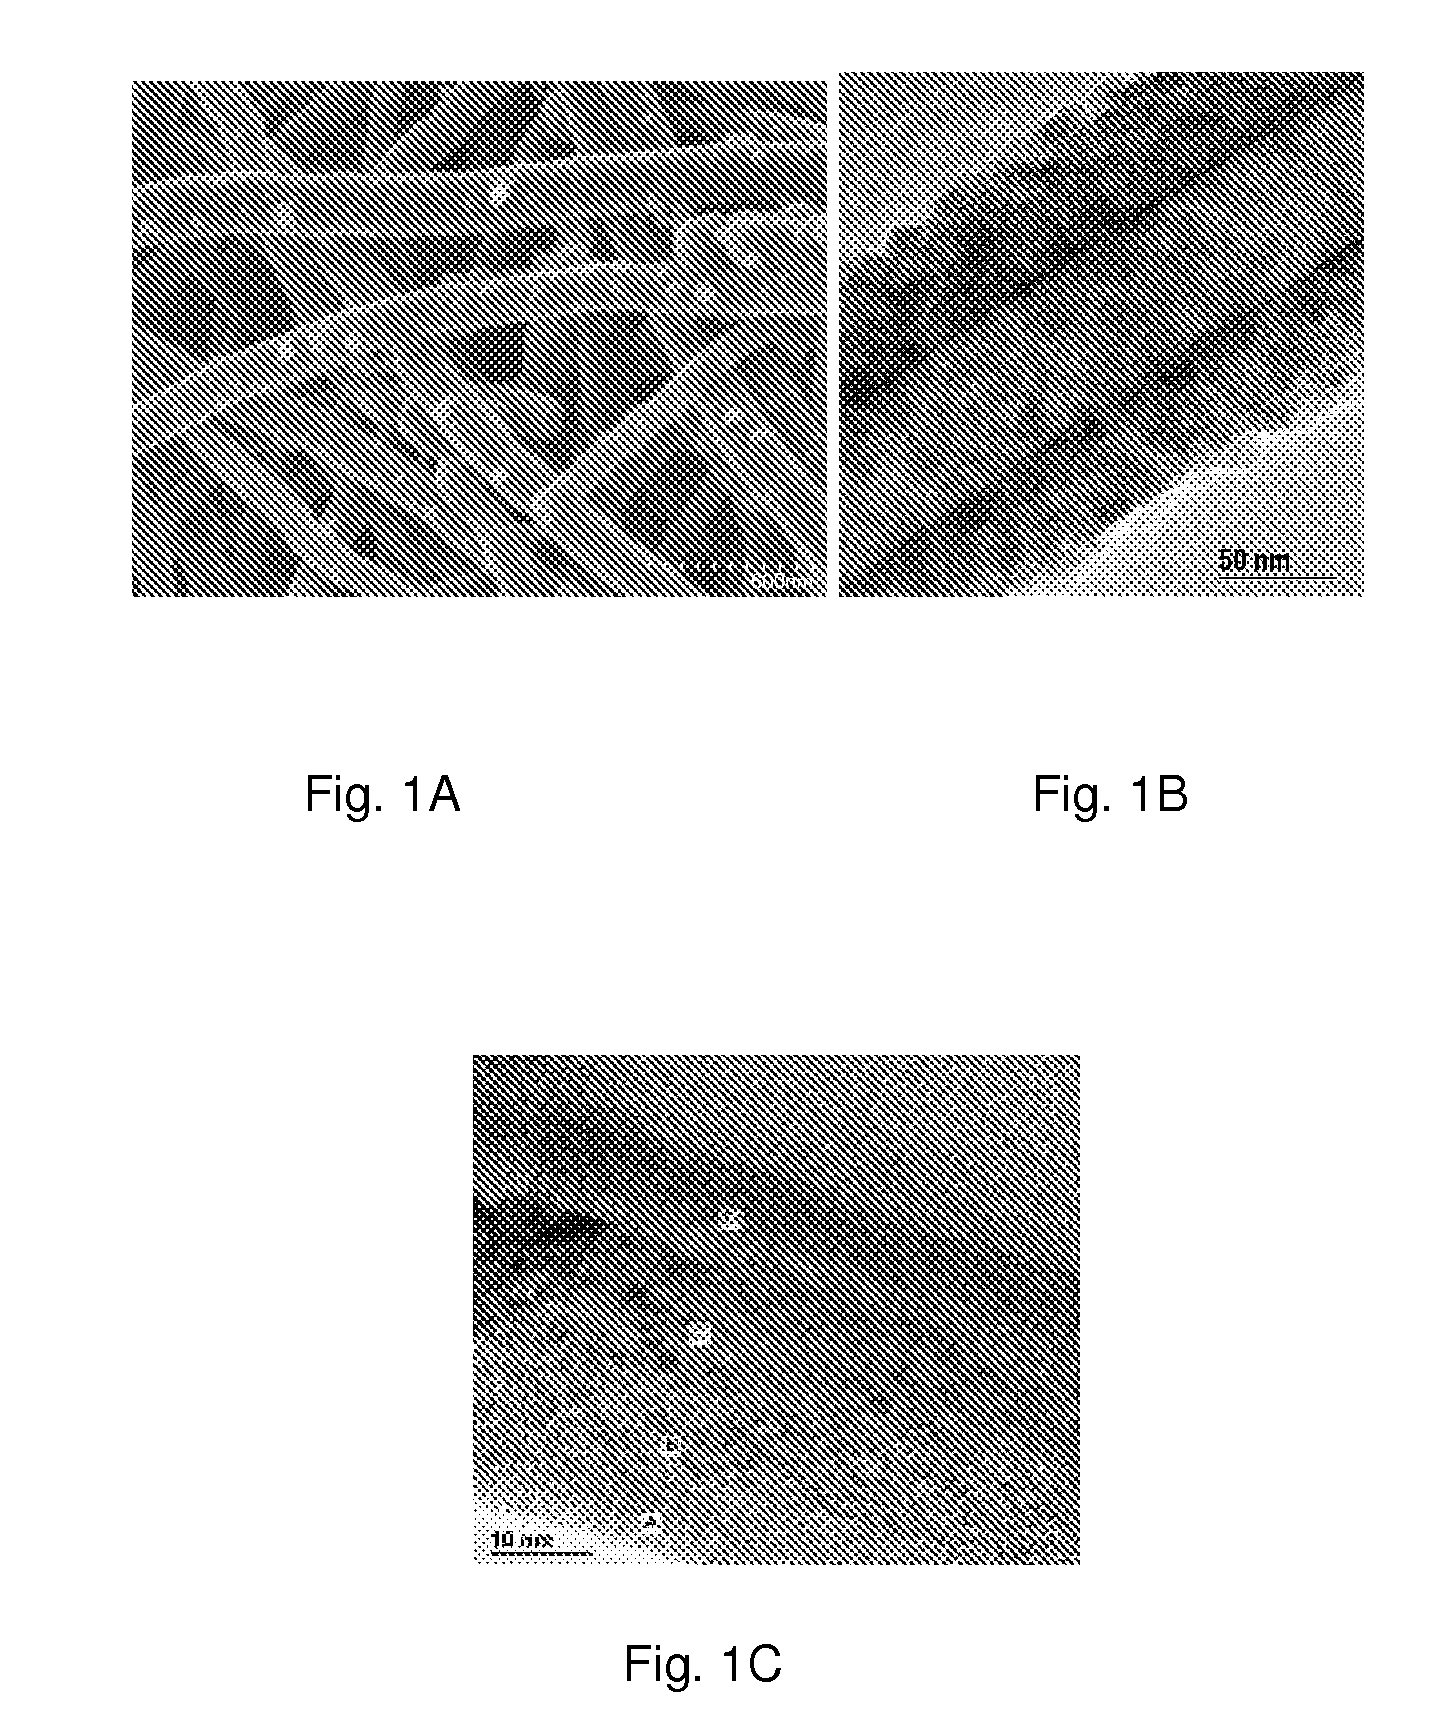 Method of depositing silicon on carbon materials and forming an anode for use in lithium ion batteries